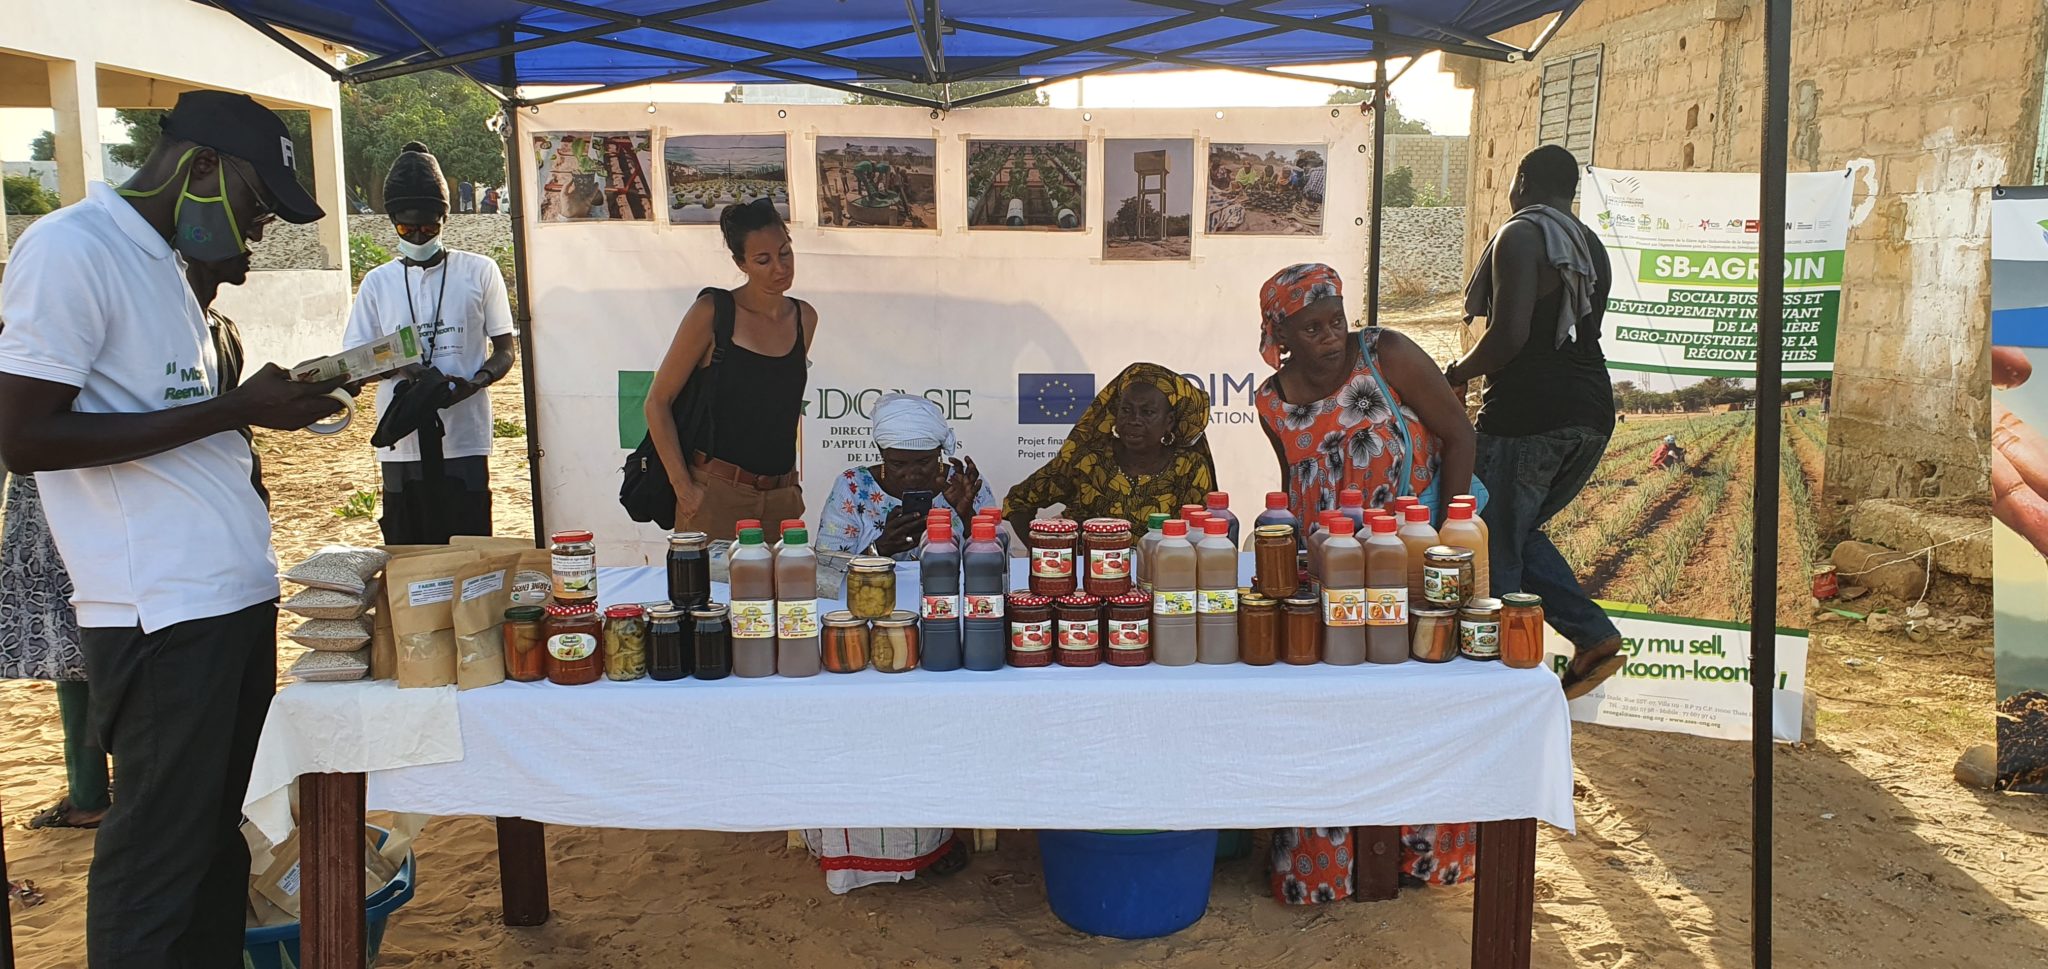 SB-AGROIN, a local partner of the CinemArena caravan specialising in the production of local products in Thiès / IOM – Marianne Anna DIOH